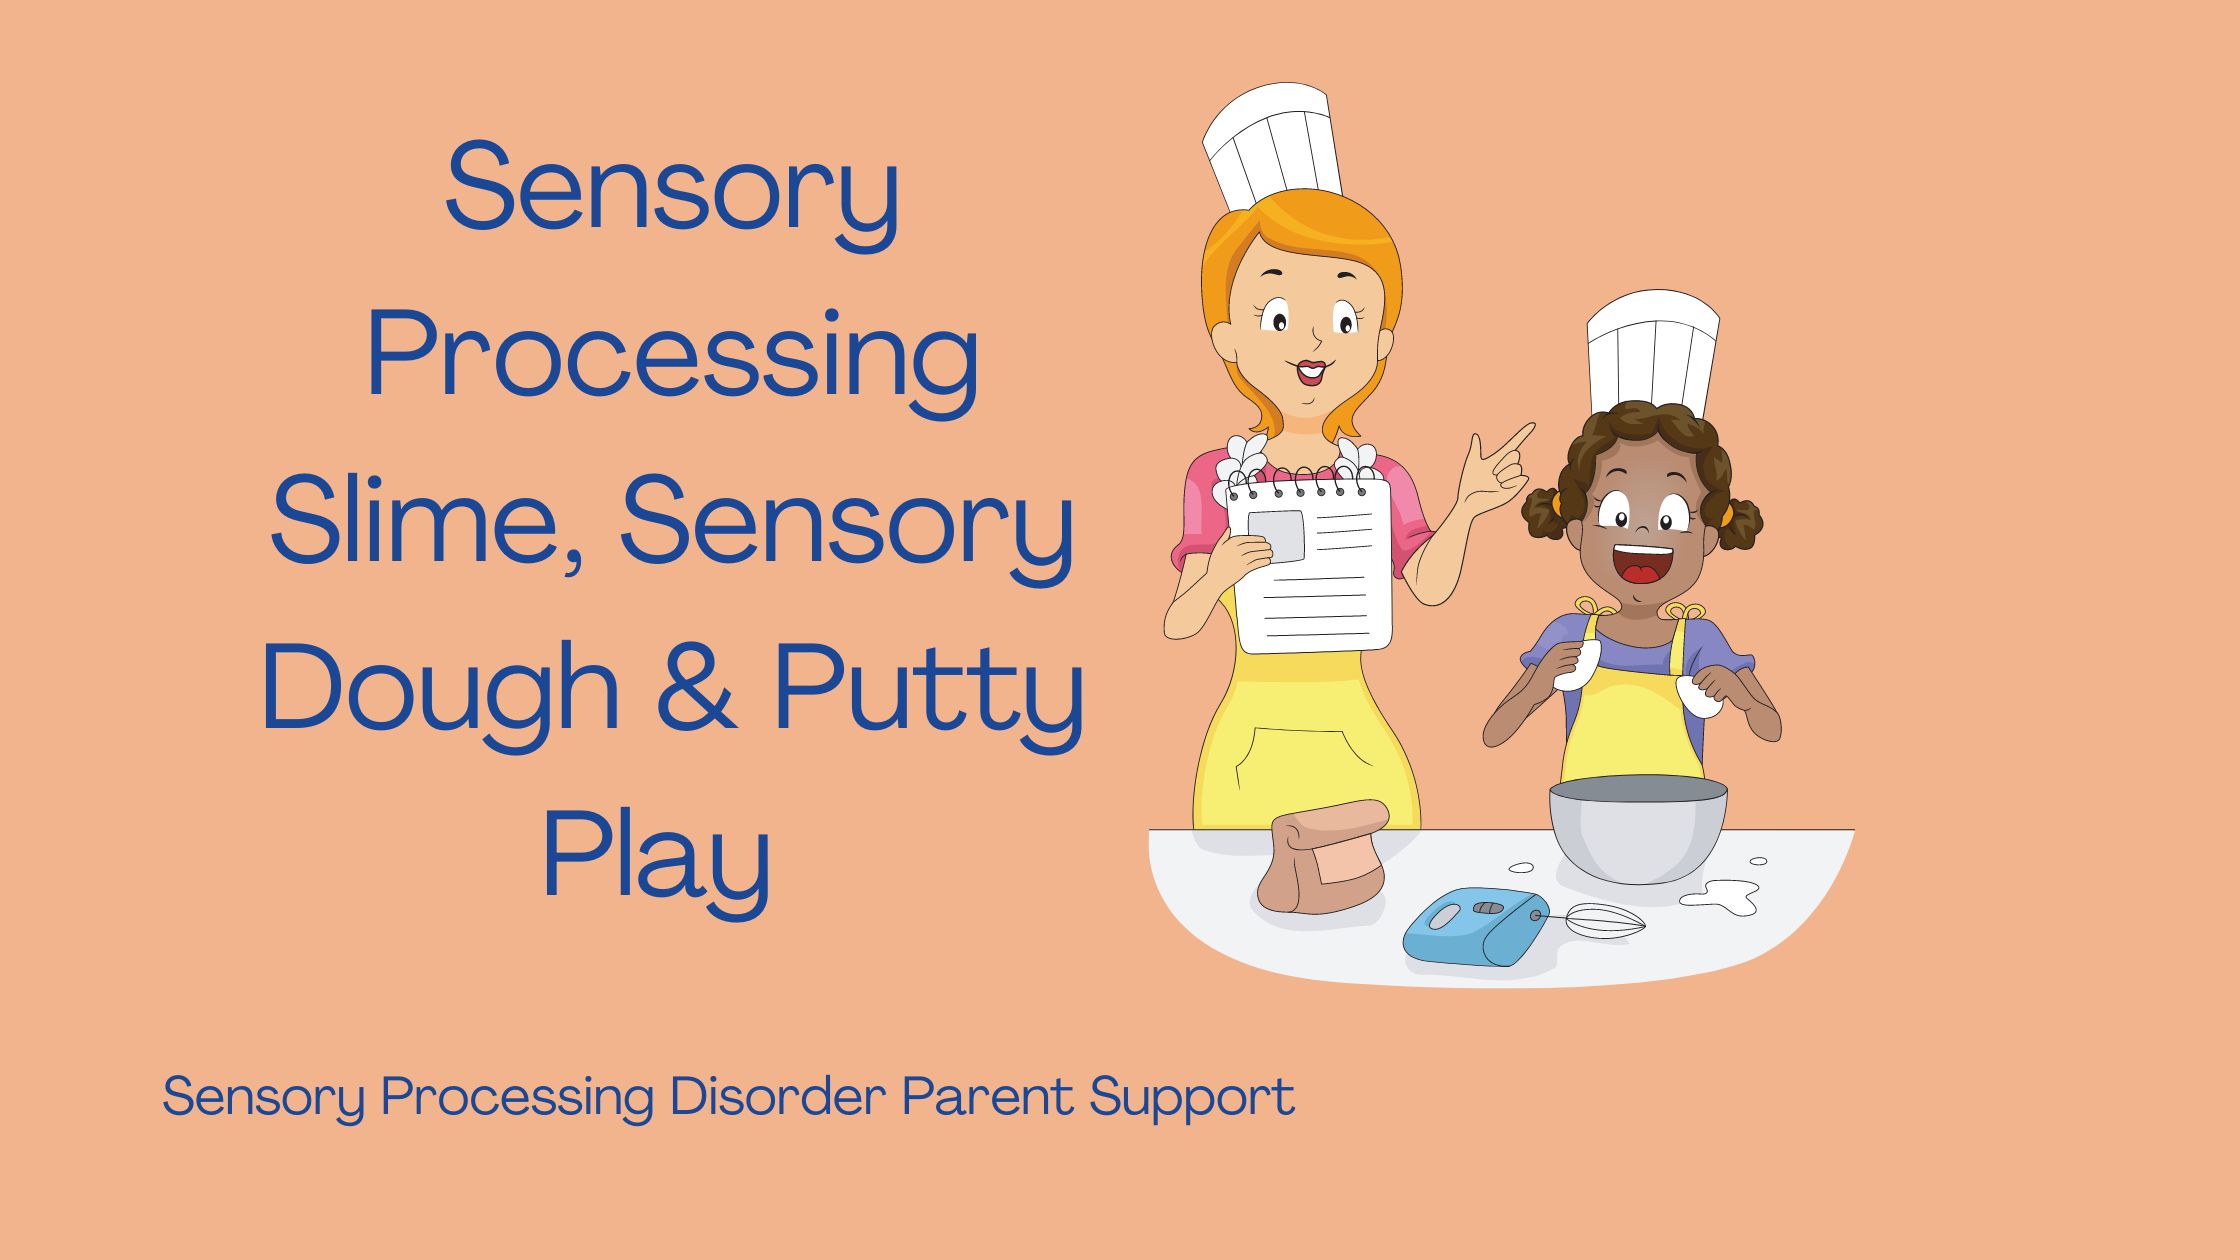 parent and child who has sensory processing disorder making play dough and slime Sensory Processing Slime, Sensory Dough & Putty Play